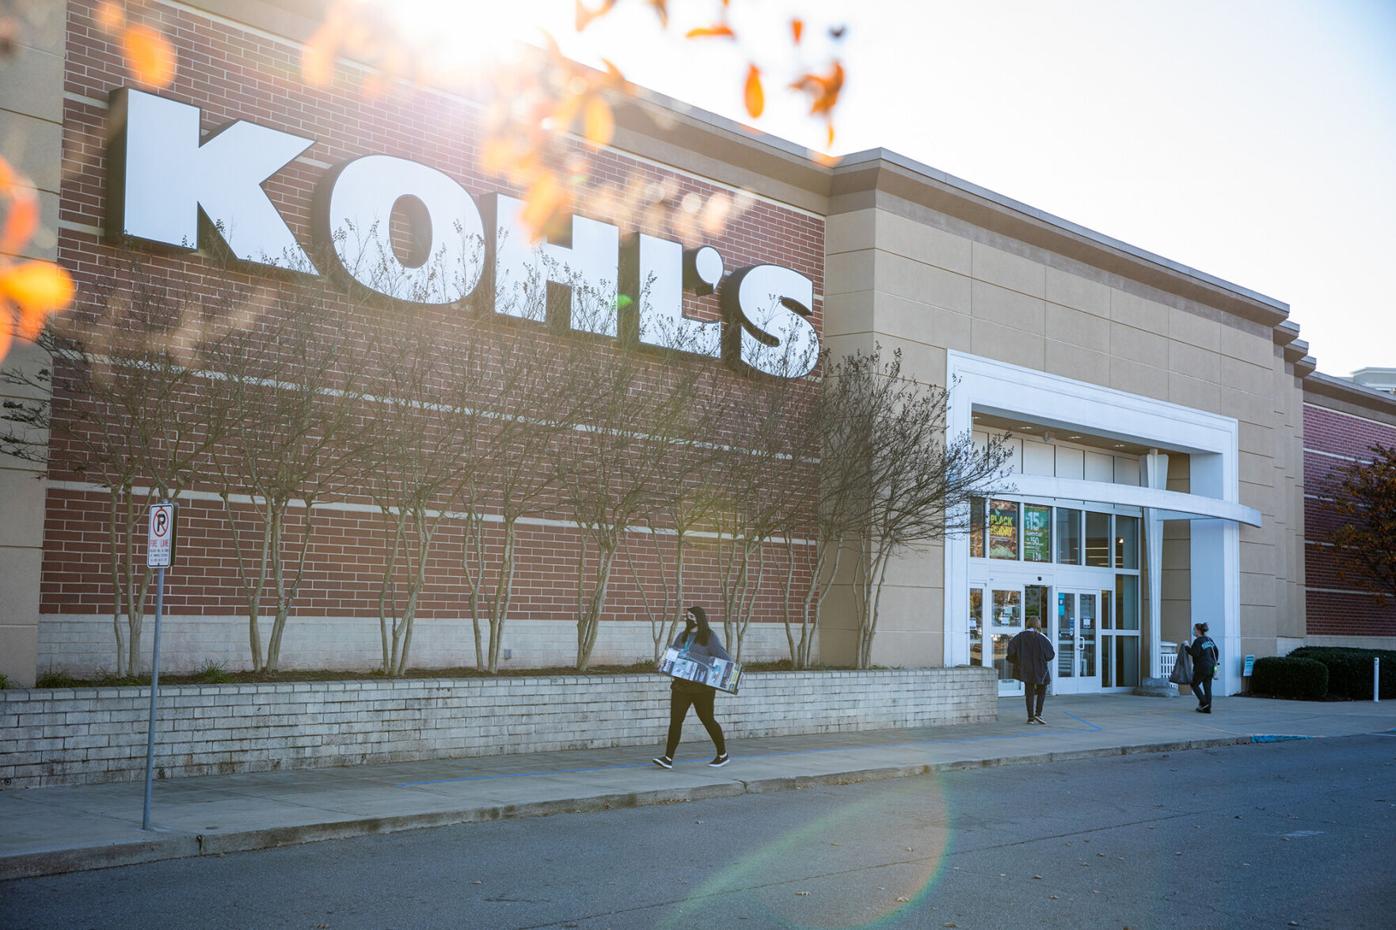 Kohl's Receives $9 Billion Offer Backed by Activist Investor - The New York  Times